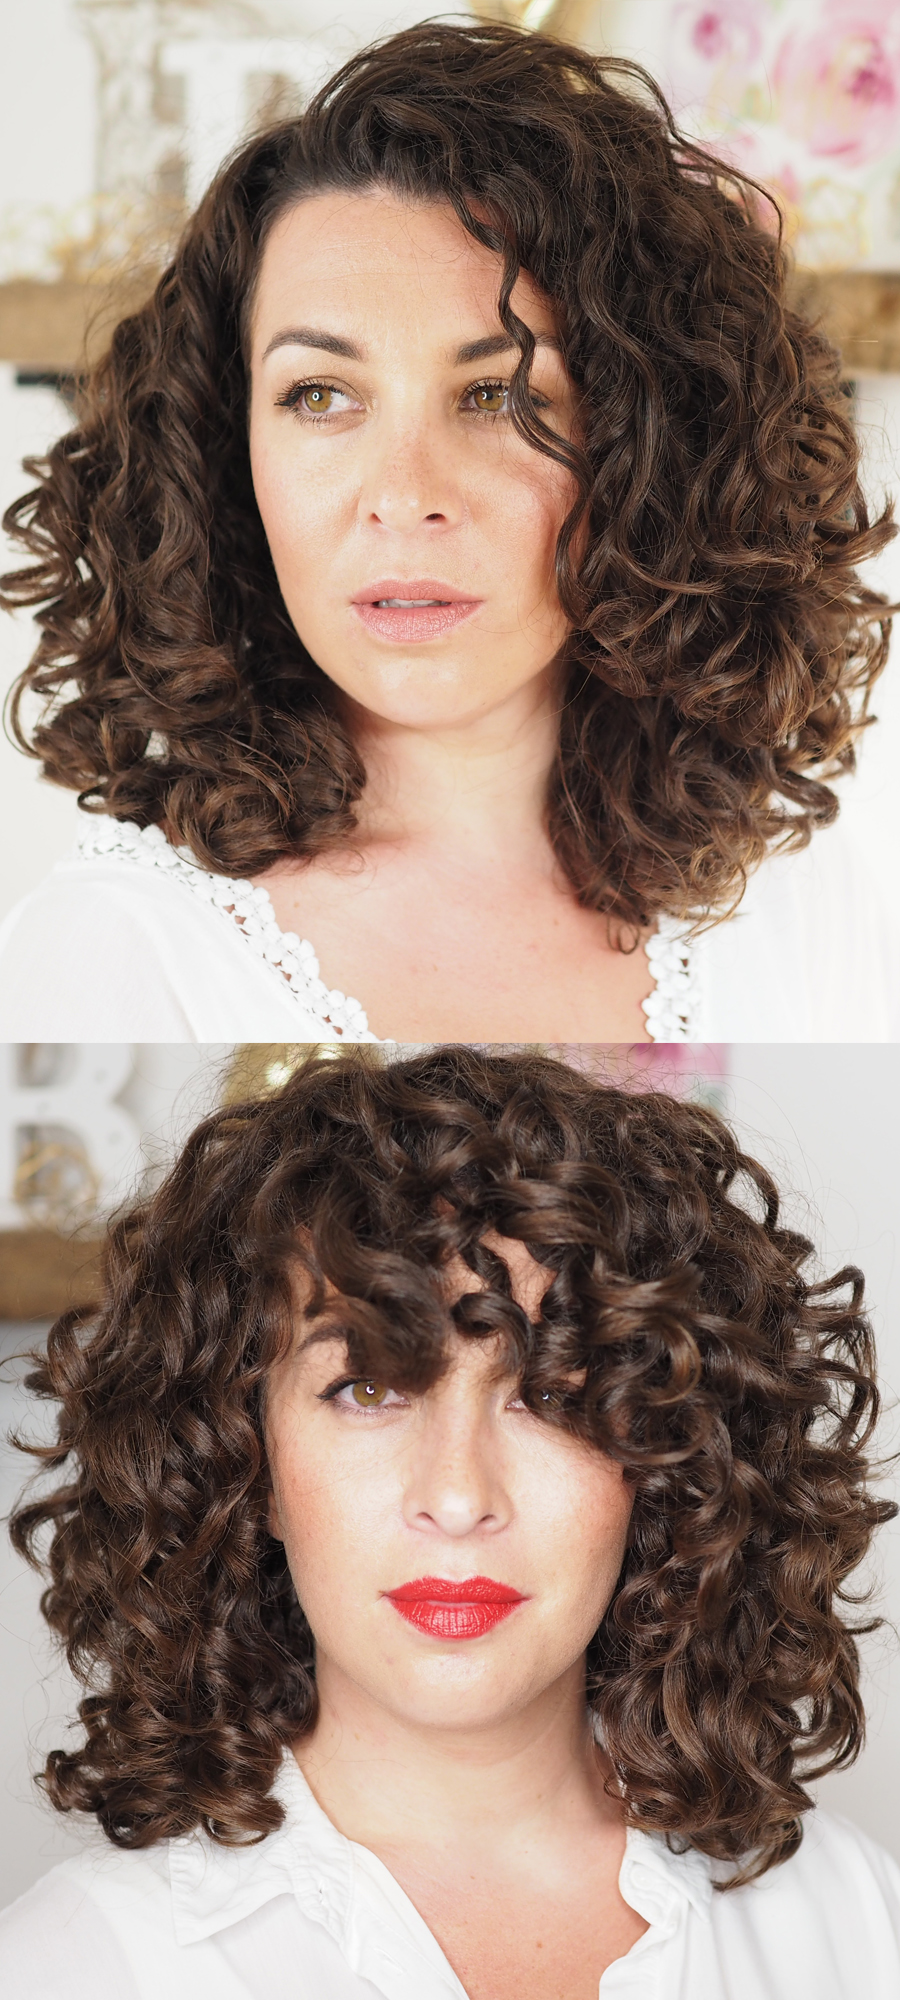 DIY cut for shape and volume